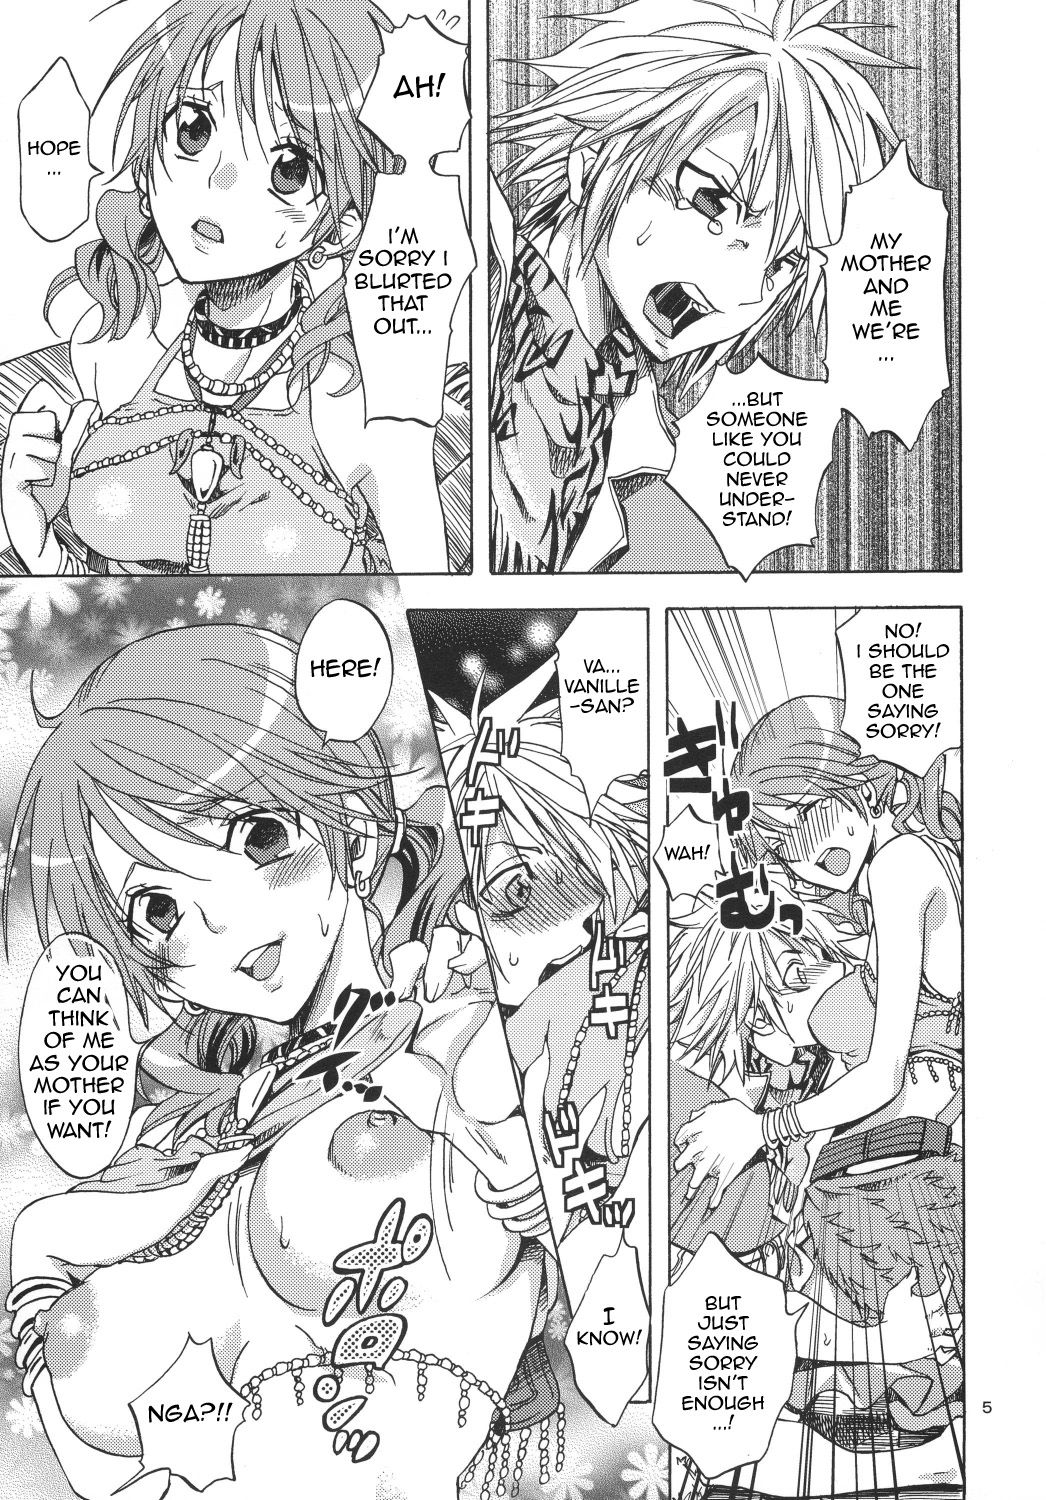 [Kurionesha] On Holiday With l&#039;Cie and Friends [Eng] (FF13) {doujin-moe.us} 